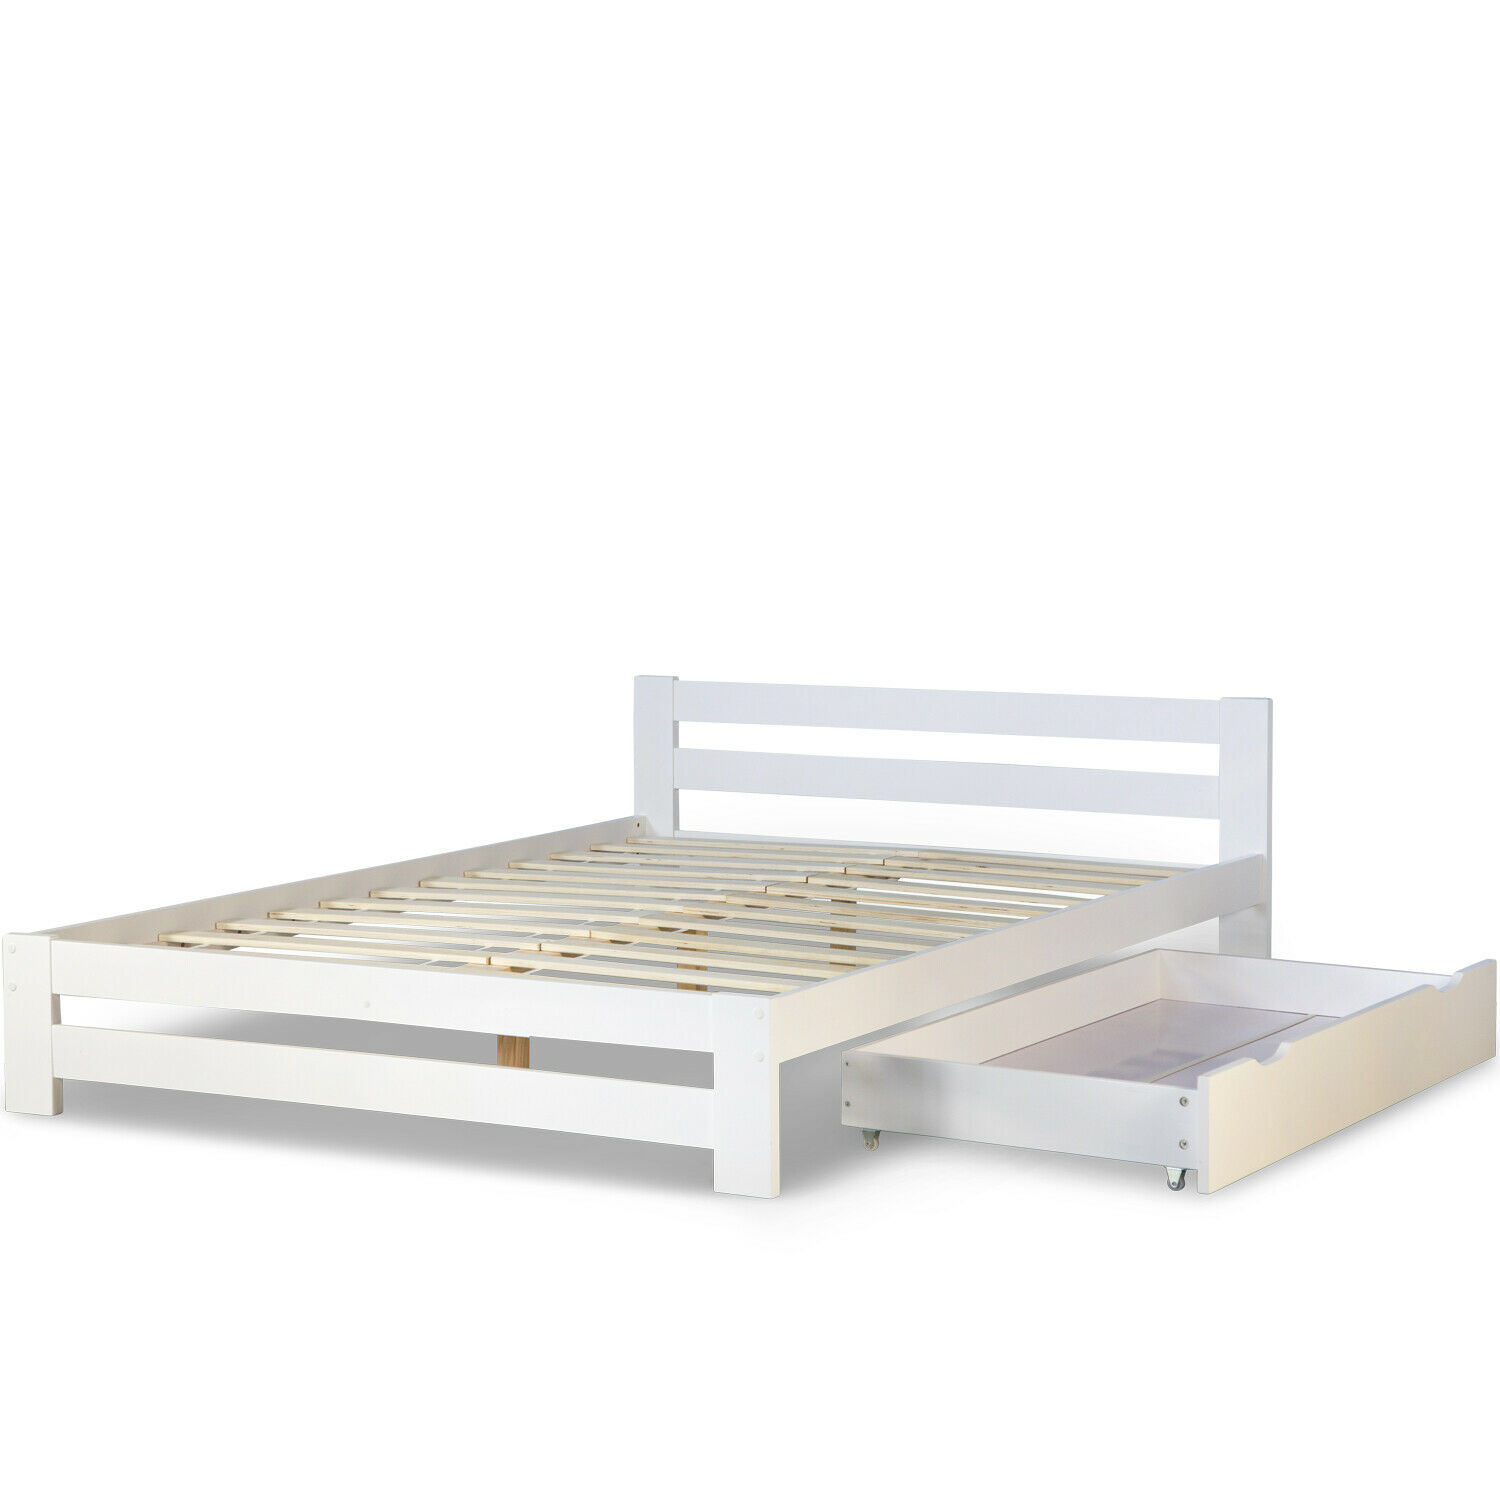 Double Bed 140x200 White Bed Drawer Daybed Wooden Bed Frame Pine